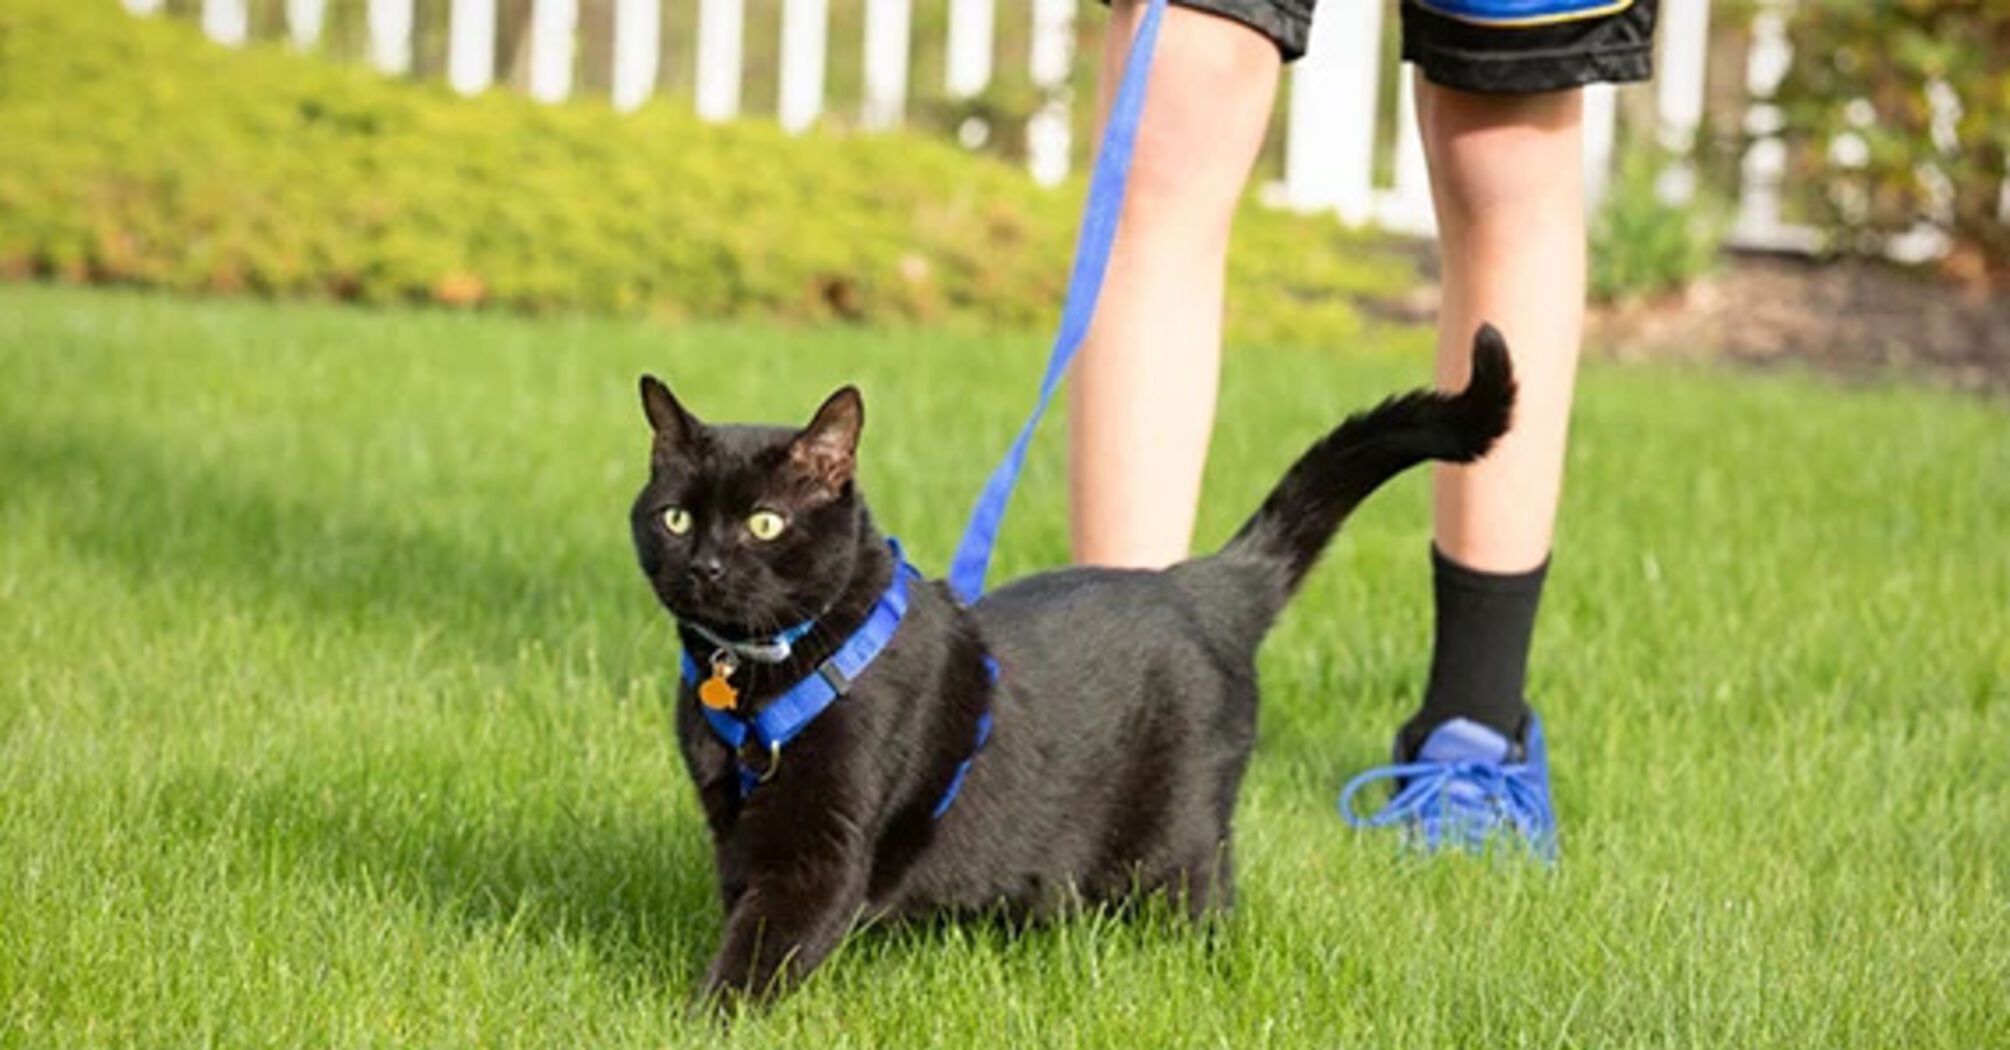 Is it possible to walk a cat on a leash